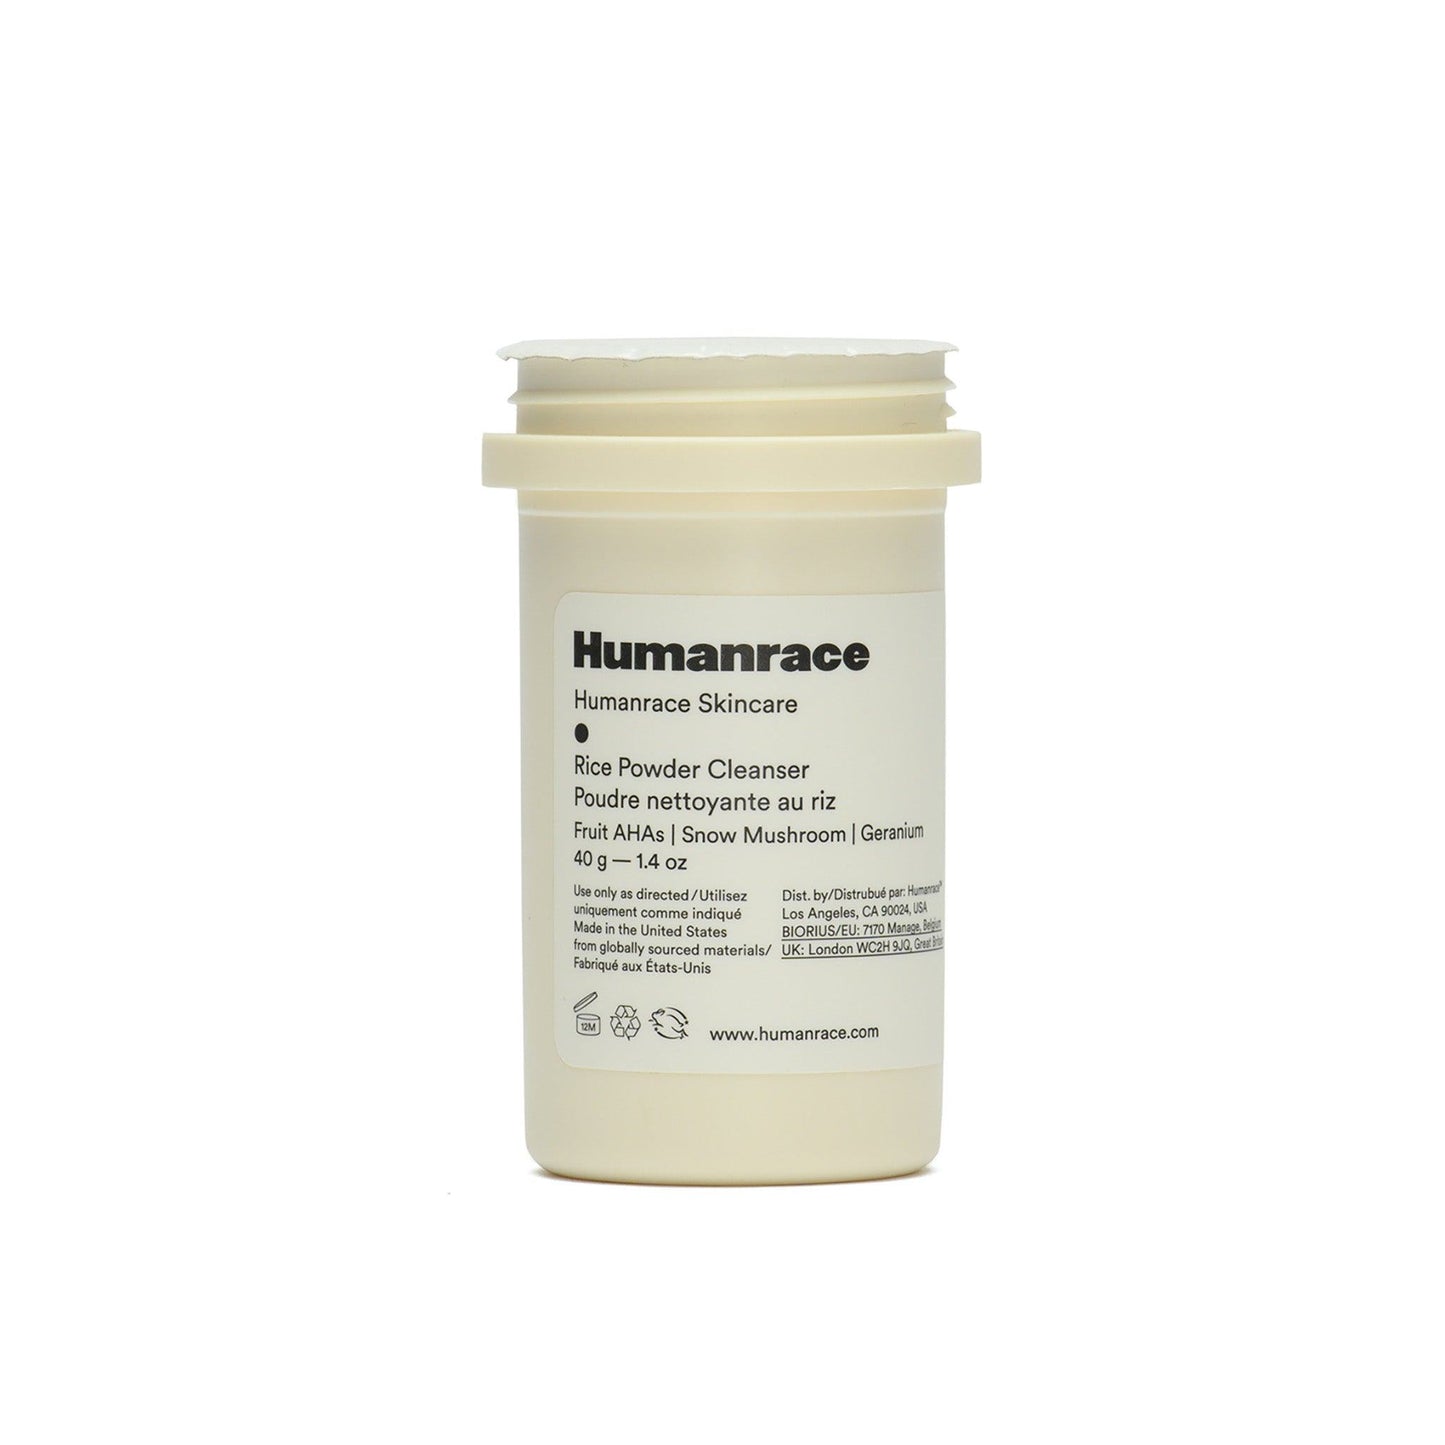 RICE POWDER CLEANSER REFILL - Humanrace